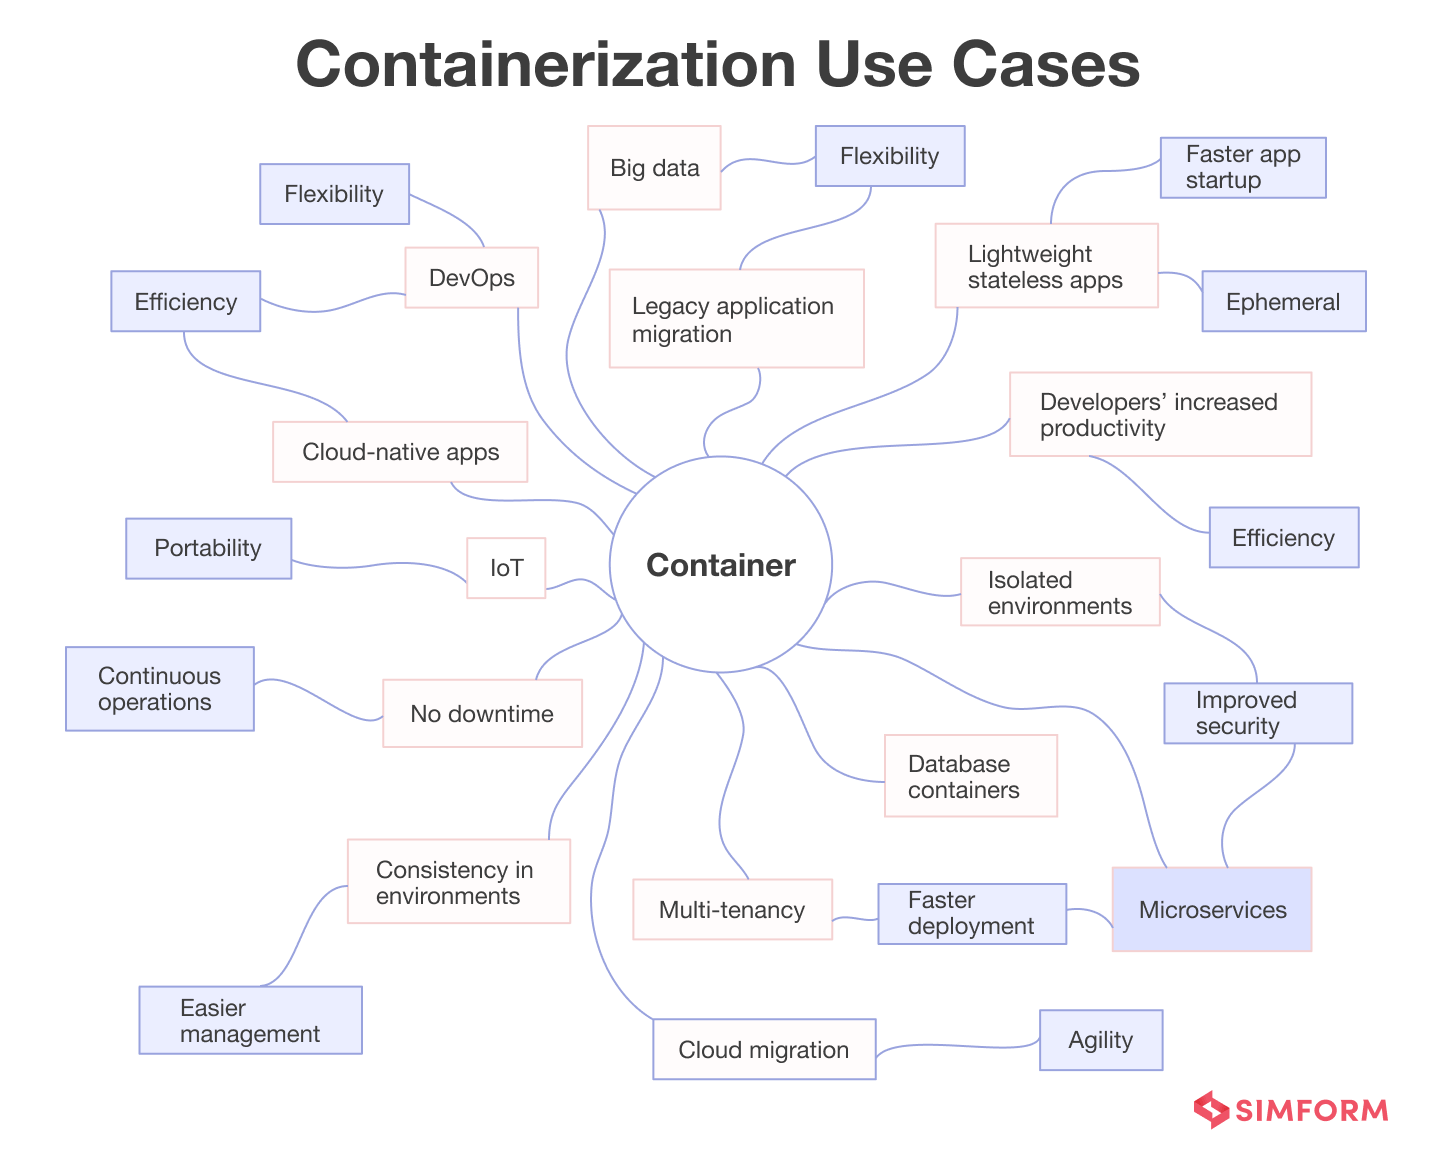 Containerization Use Cases